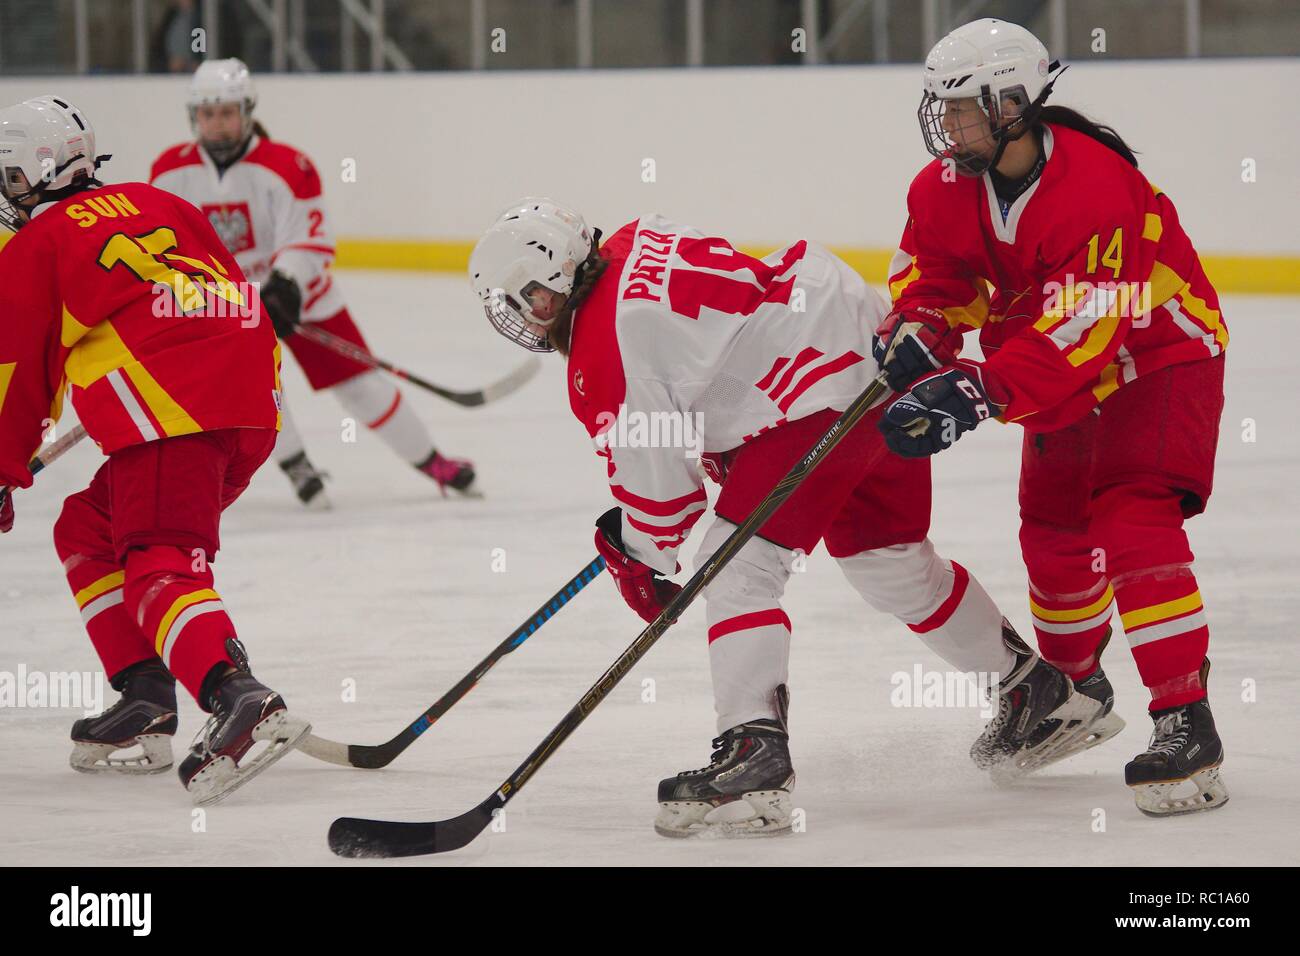 Dumfries, Scotland, 12 January 2019. Yuting Sun of China being followed by Vanessa Patla of Poland and Qianhua Li during their match in the 2019 Ice Hockey U18 Women’s World Championship, Division 1, Group B, at Dumfries Ice Bowl. Credit: Colin Edwards/Alamy Live News. Stock Photo